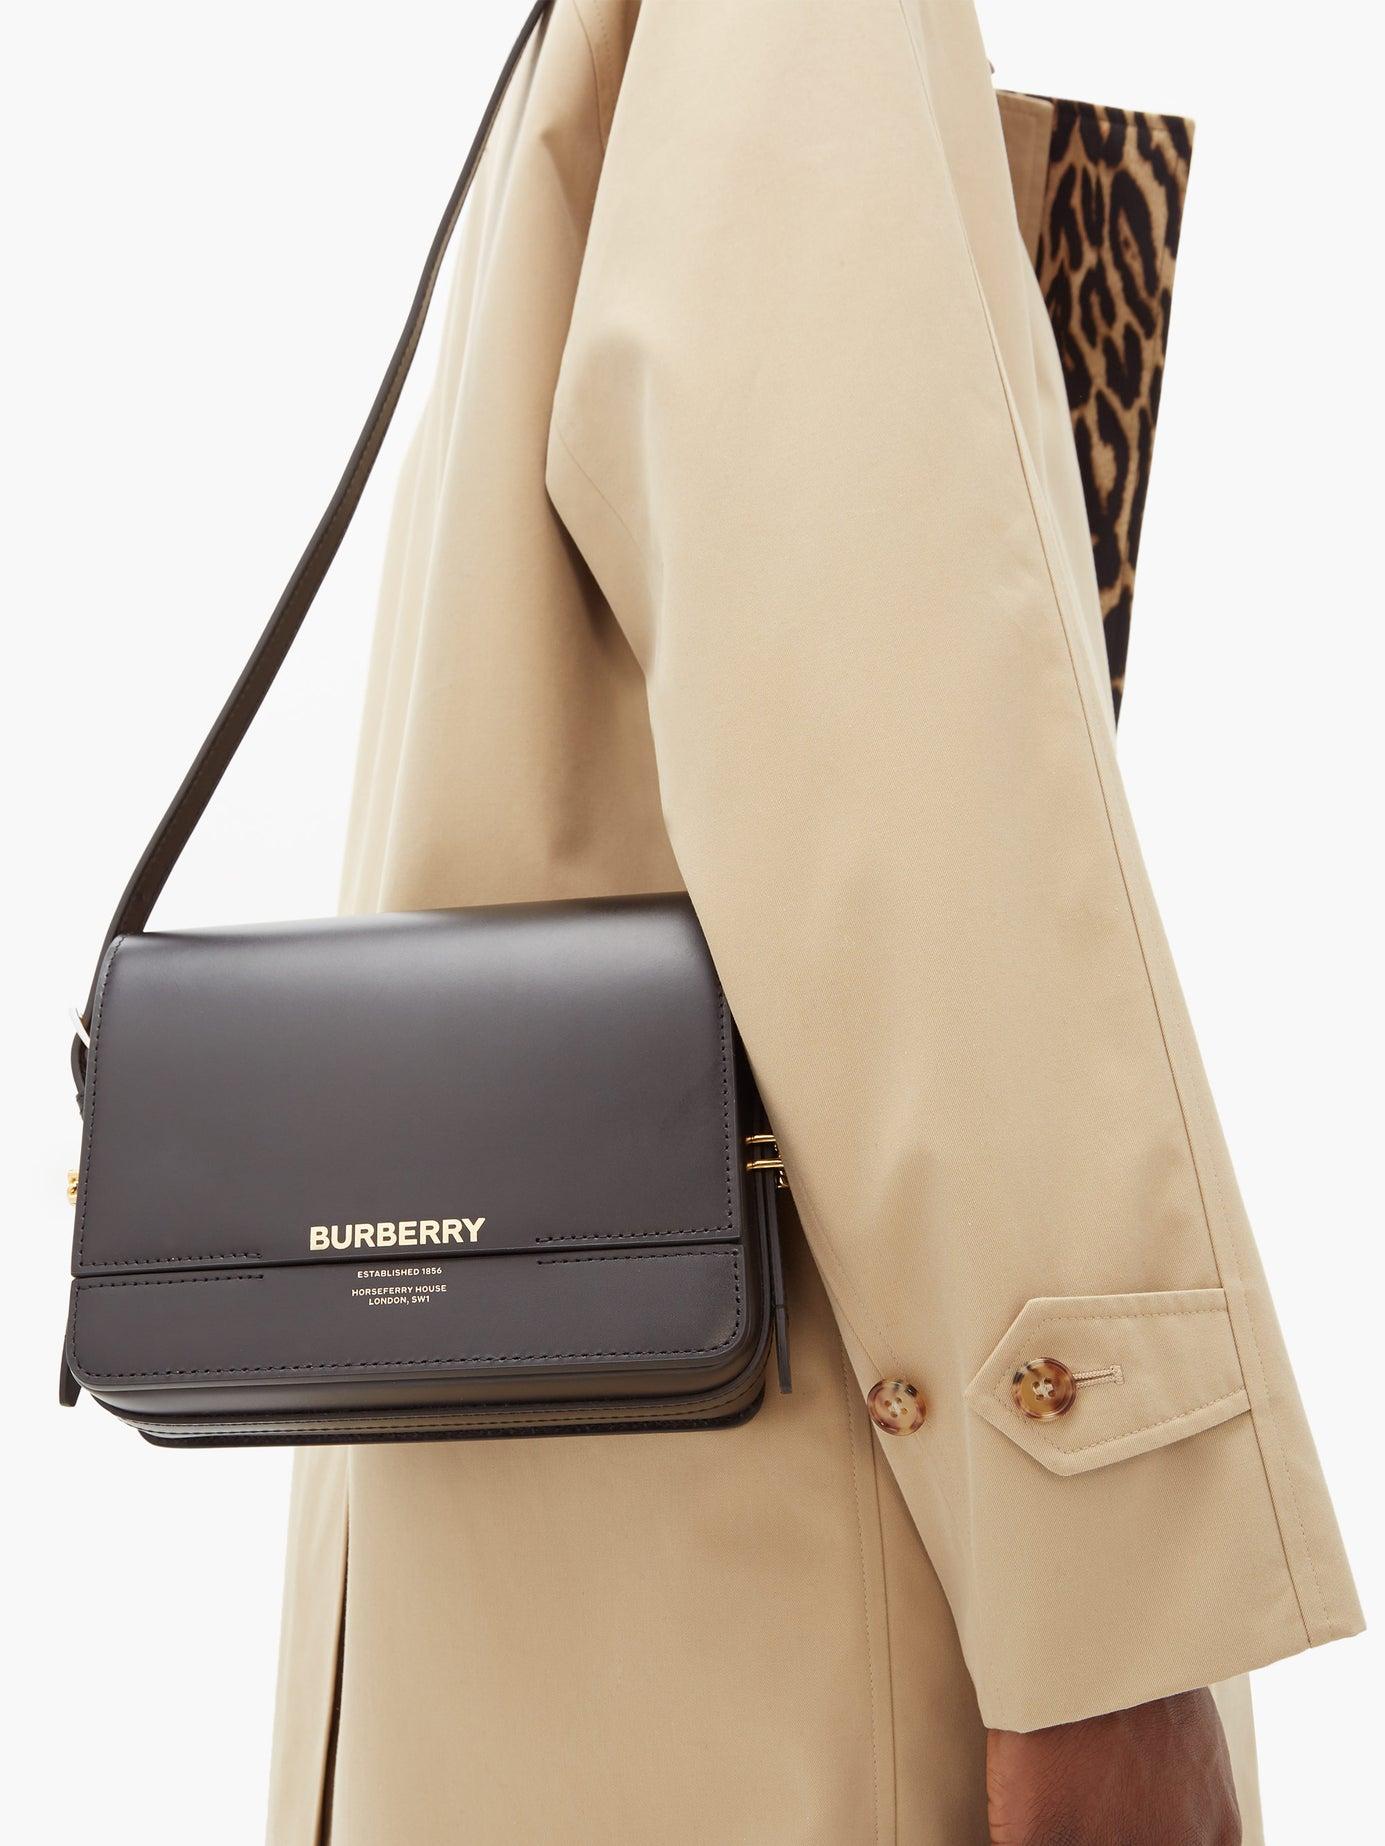 Burberry Grace Small Leather Shoulder Bag